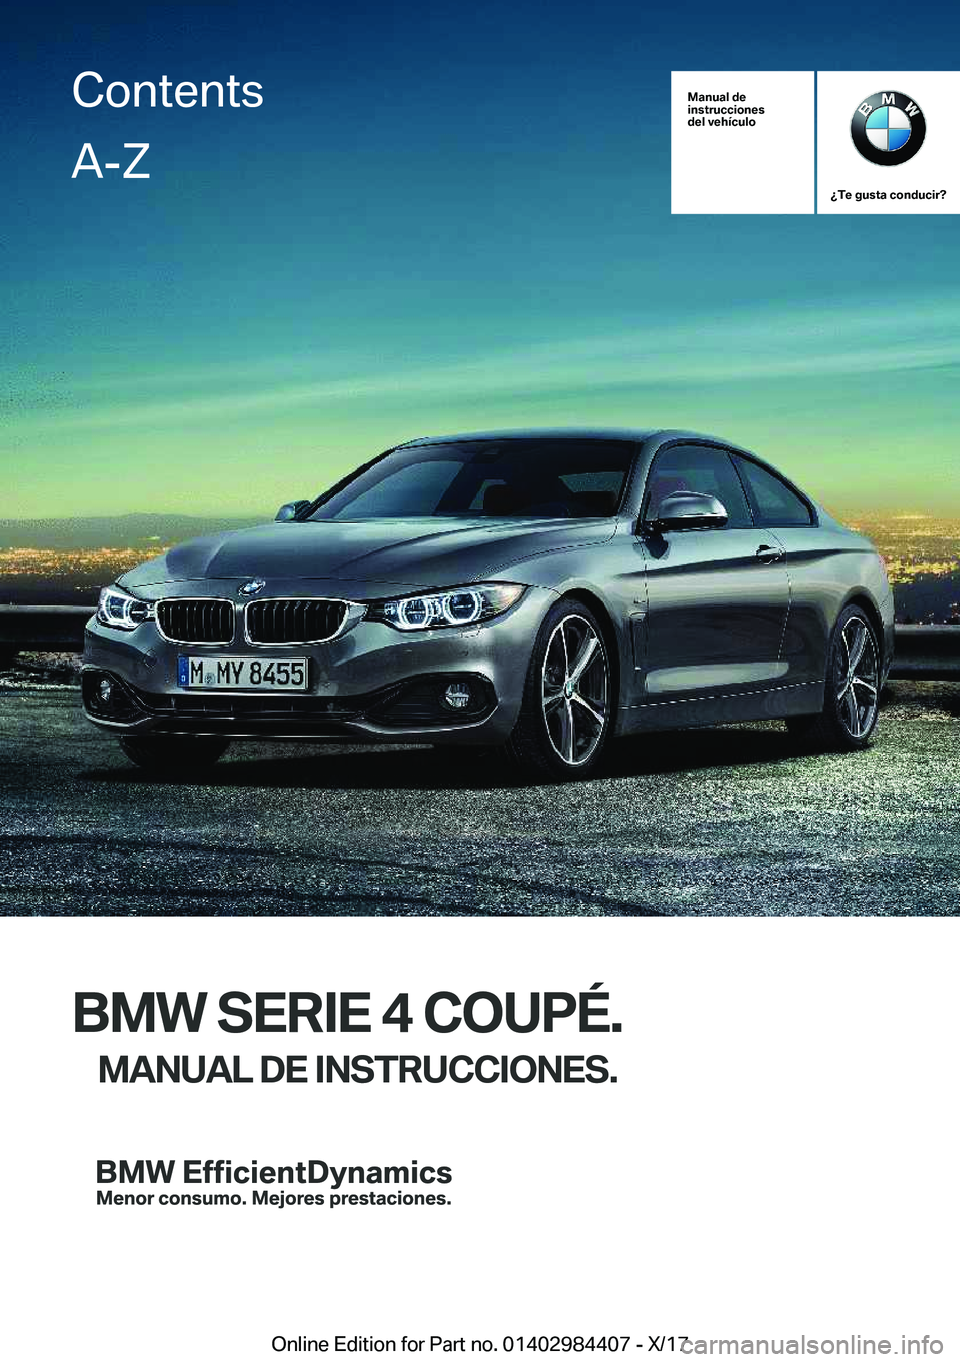 BMW 4 SERIES COUPE 2018  Manuales de Empleo (in Spanish) �M�a�n�u�a�l��d�e
�i�n�s�t�r�u�c�c�i�o�n�e�s
�d�e�l��v�e�h�